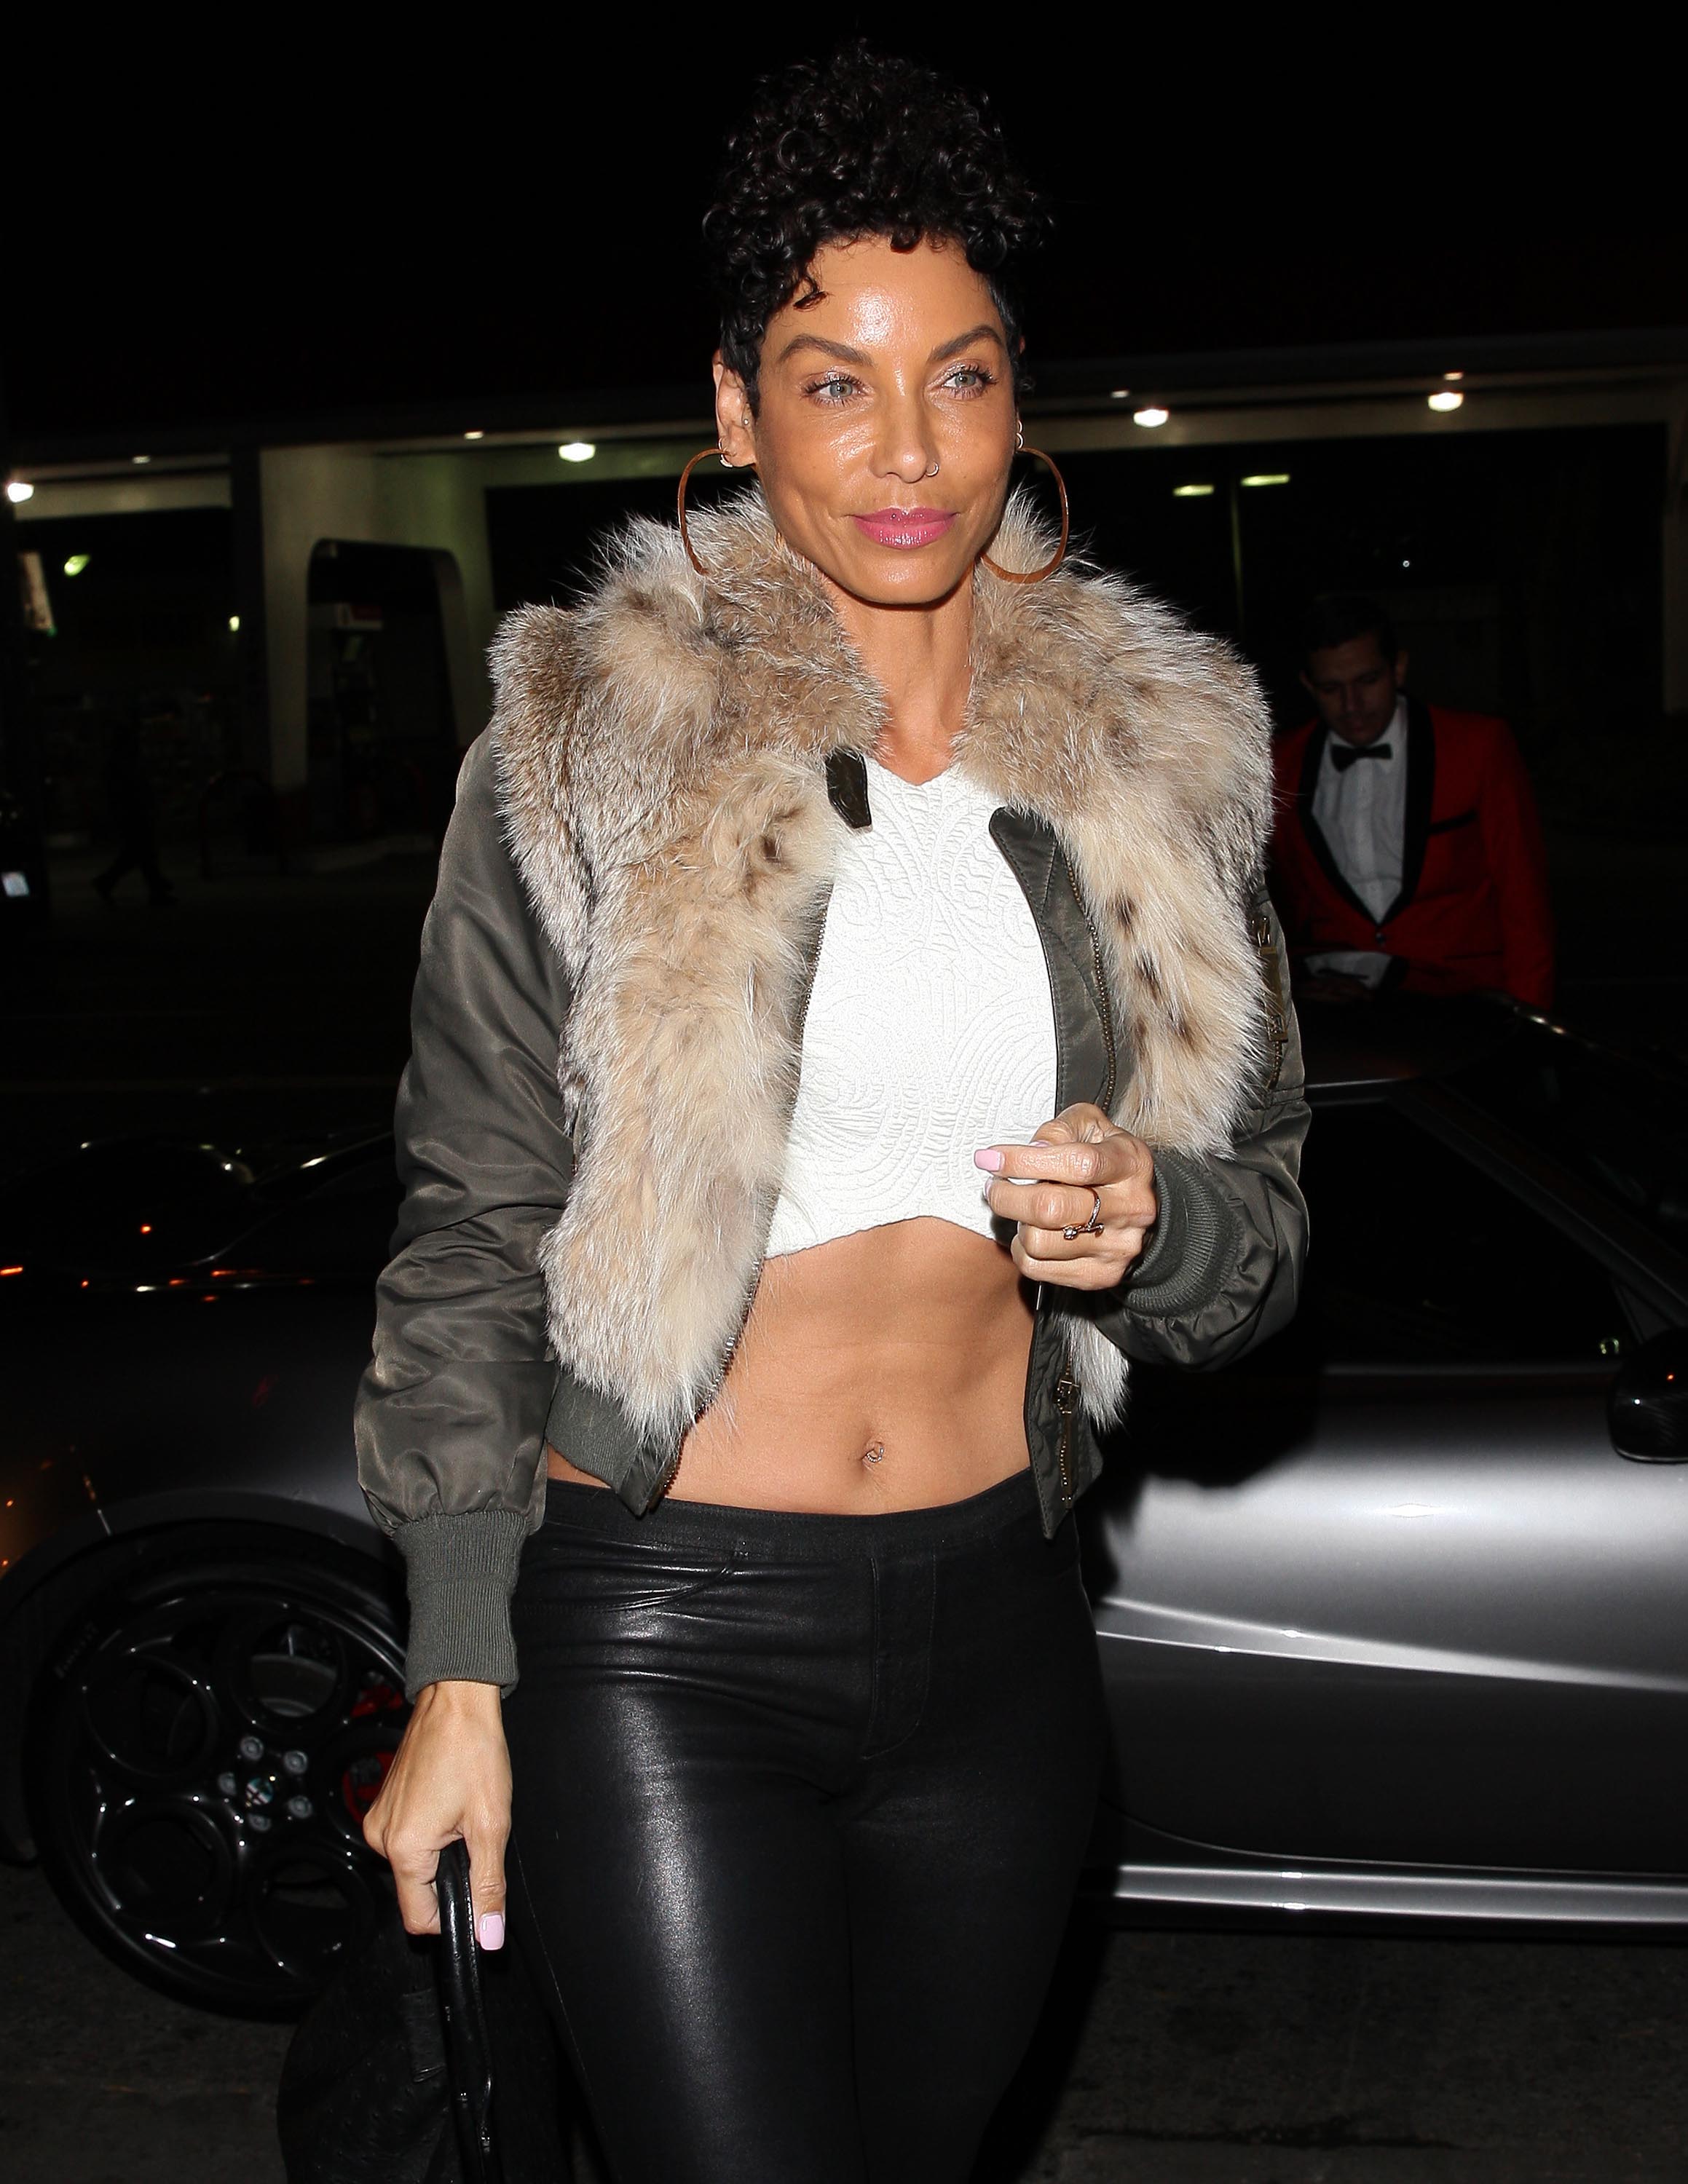 Nicole Murphy at Delilah club in West Hollywood